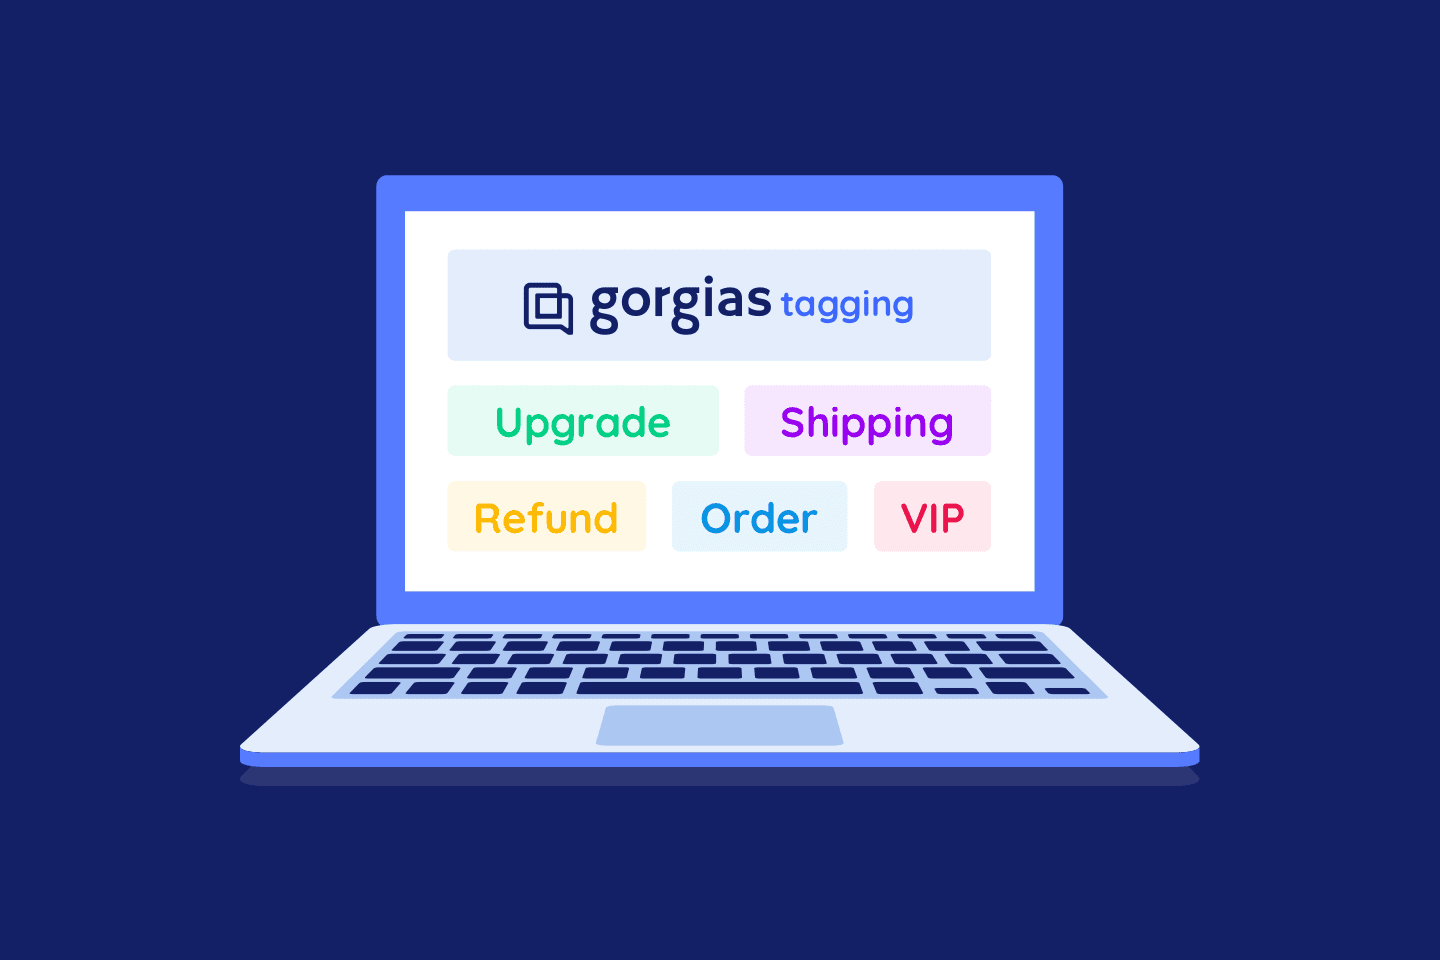 Best Practices for Organizing Tags in Gorgias